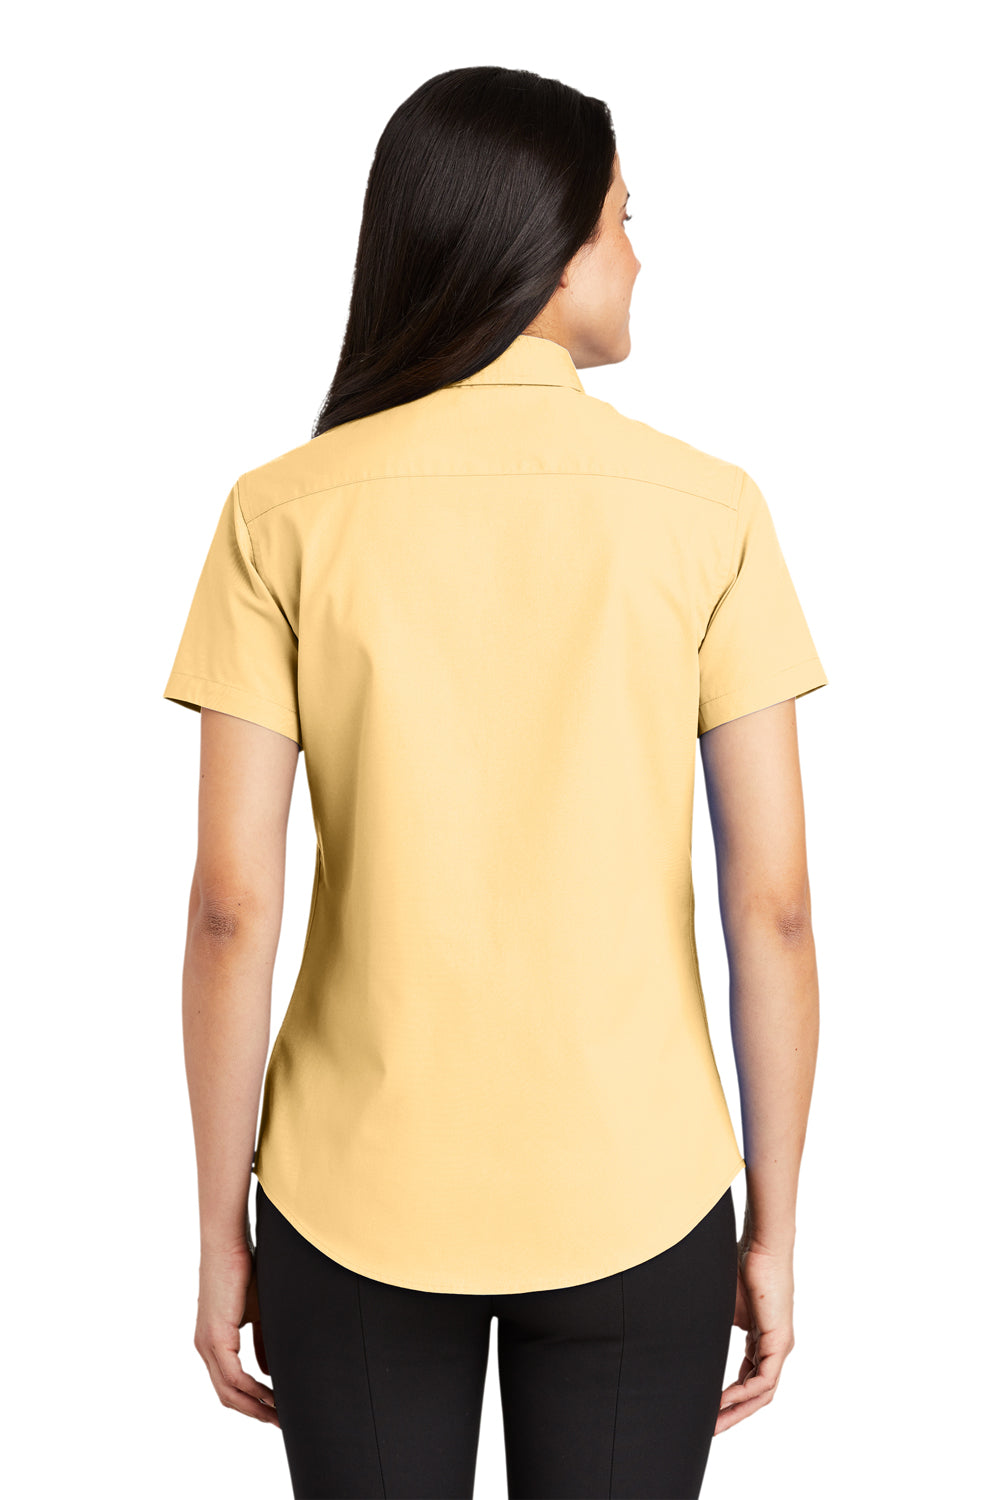 Port Authority L508 Womens Easy Care Wrinkle Resistant Short Sleeve Button Down Shirt Yellow Back